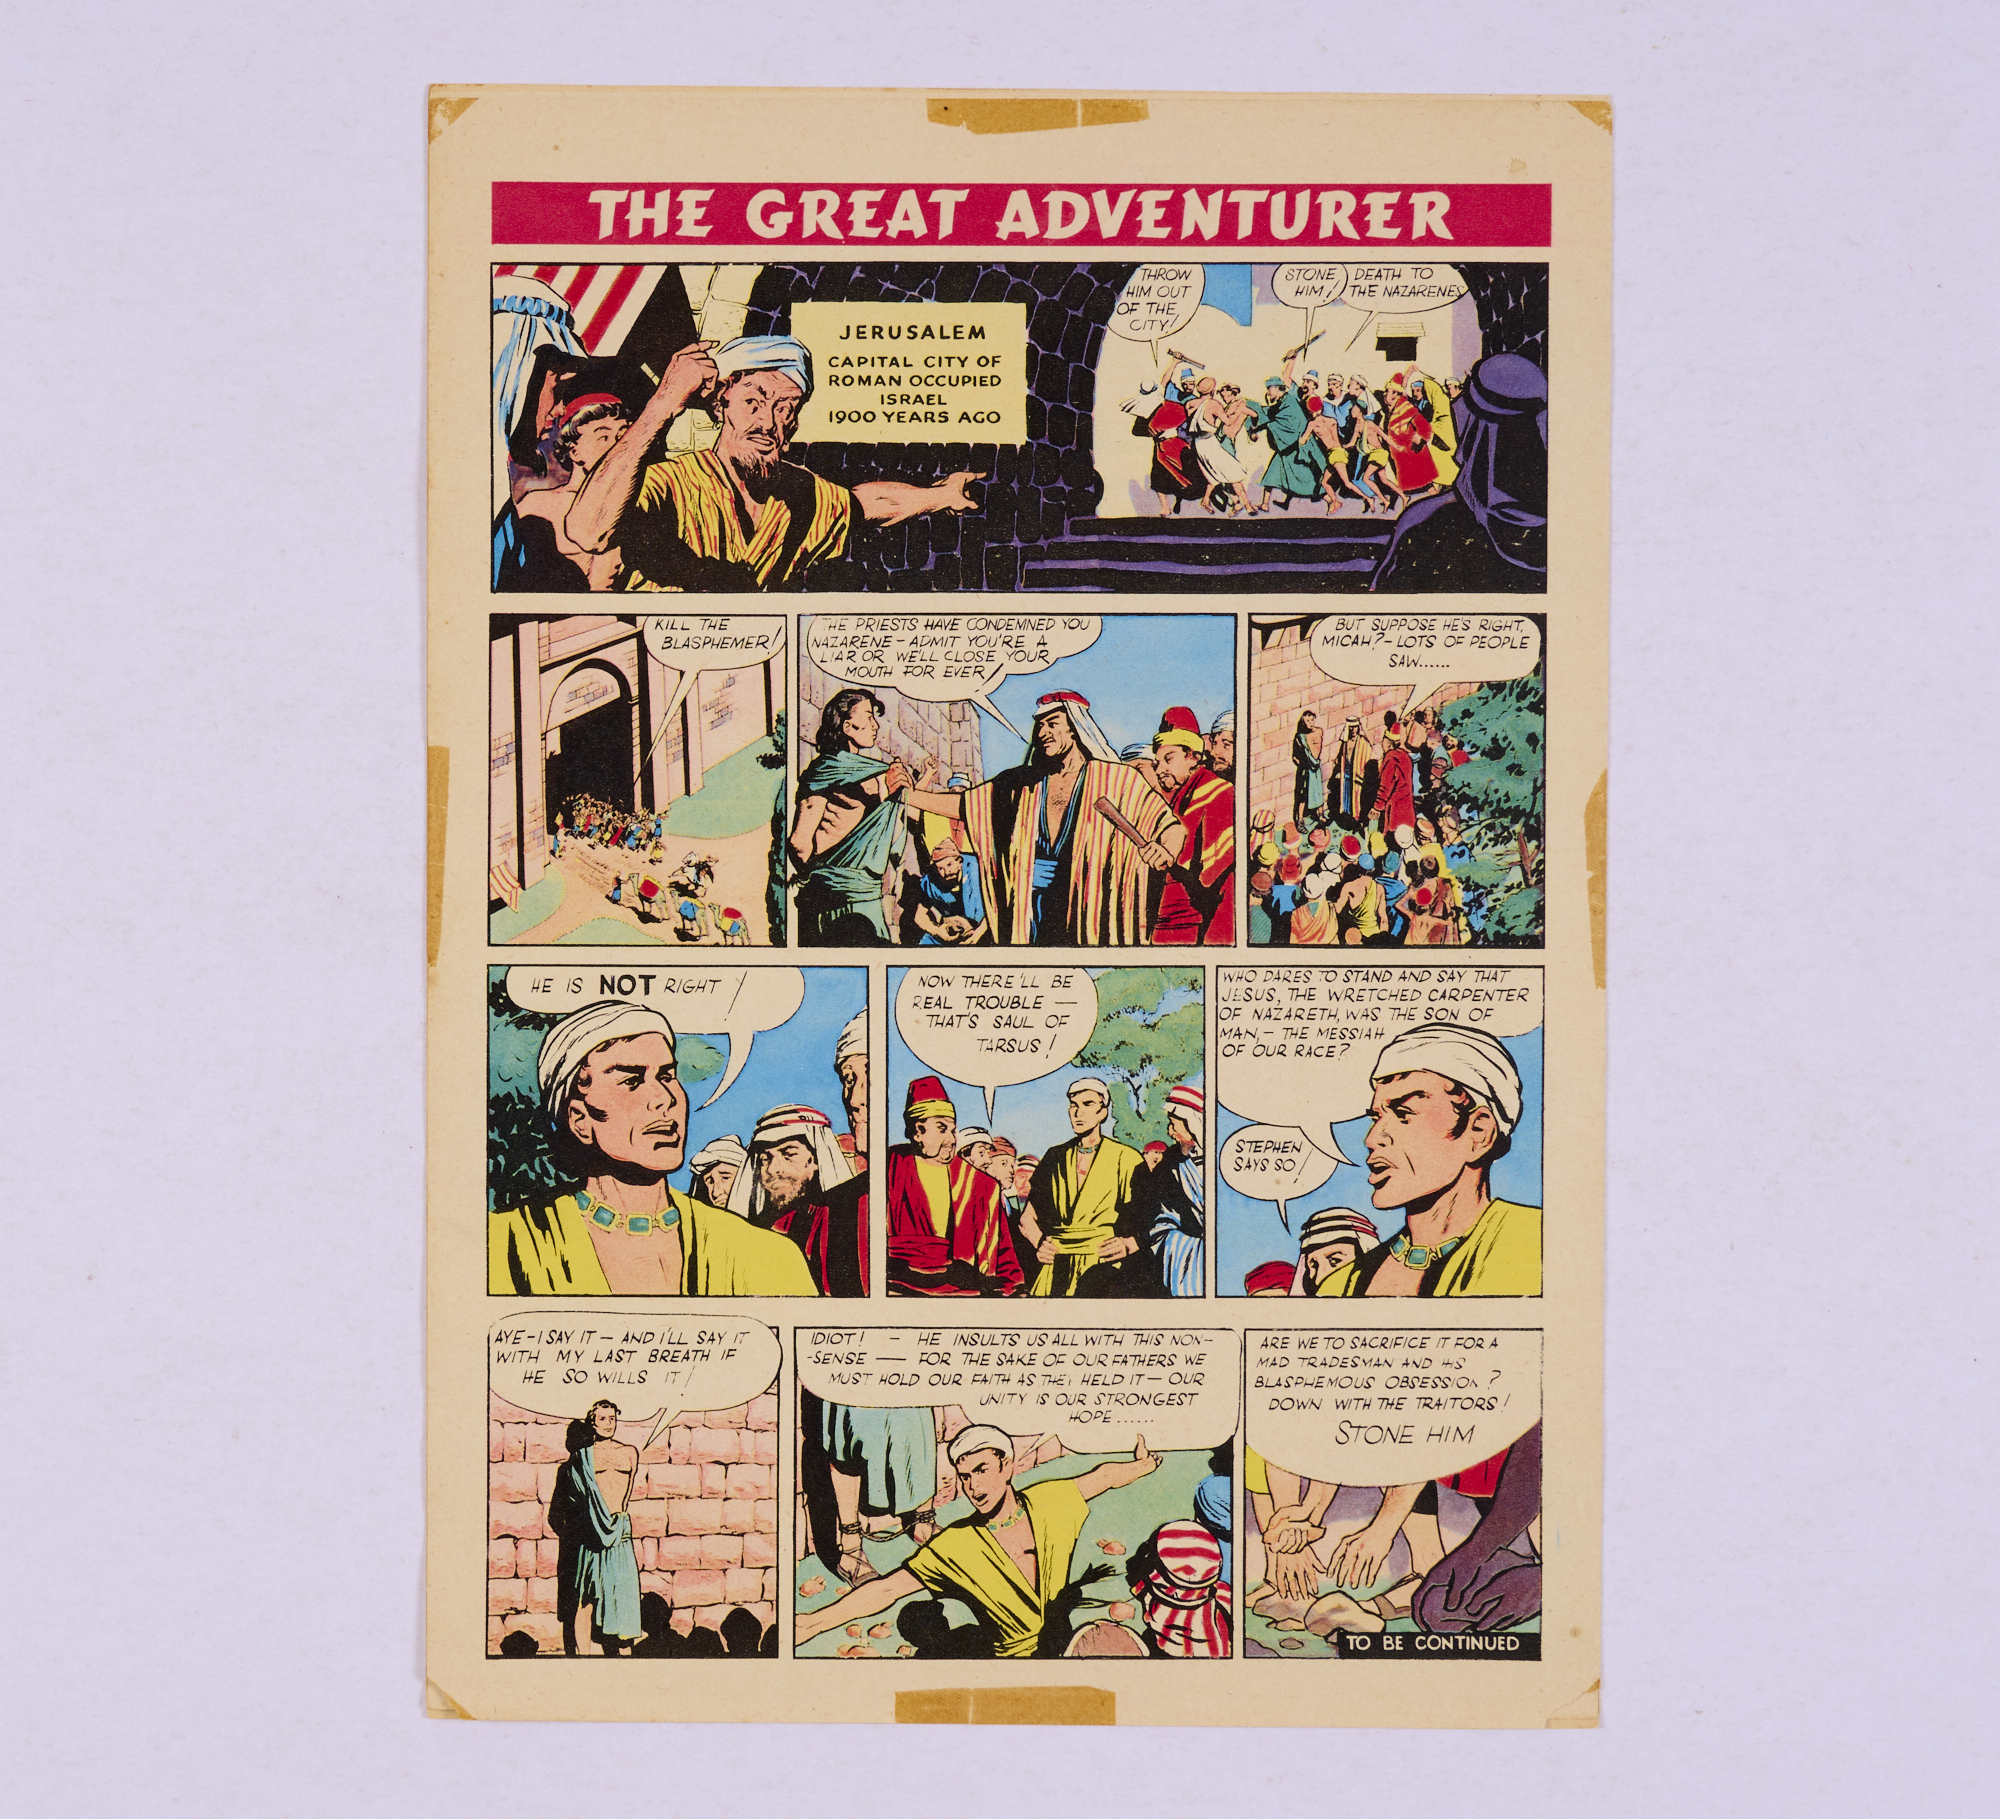 Eagle No 1 promo (1950). Promotional 8 pg full colour issue distributed to churches and schools in - Image 5 of 5